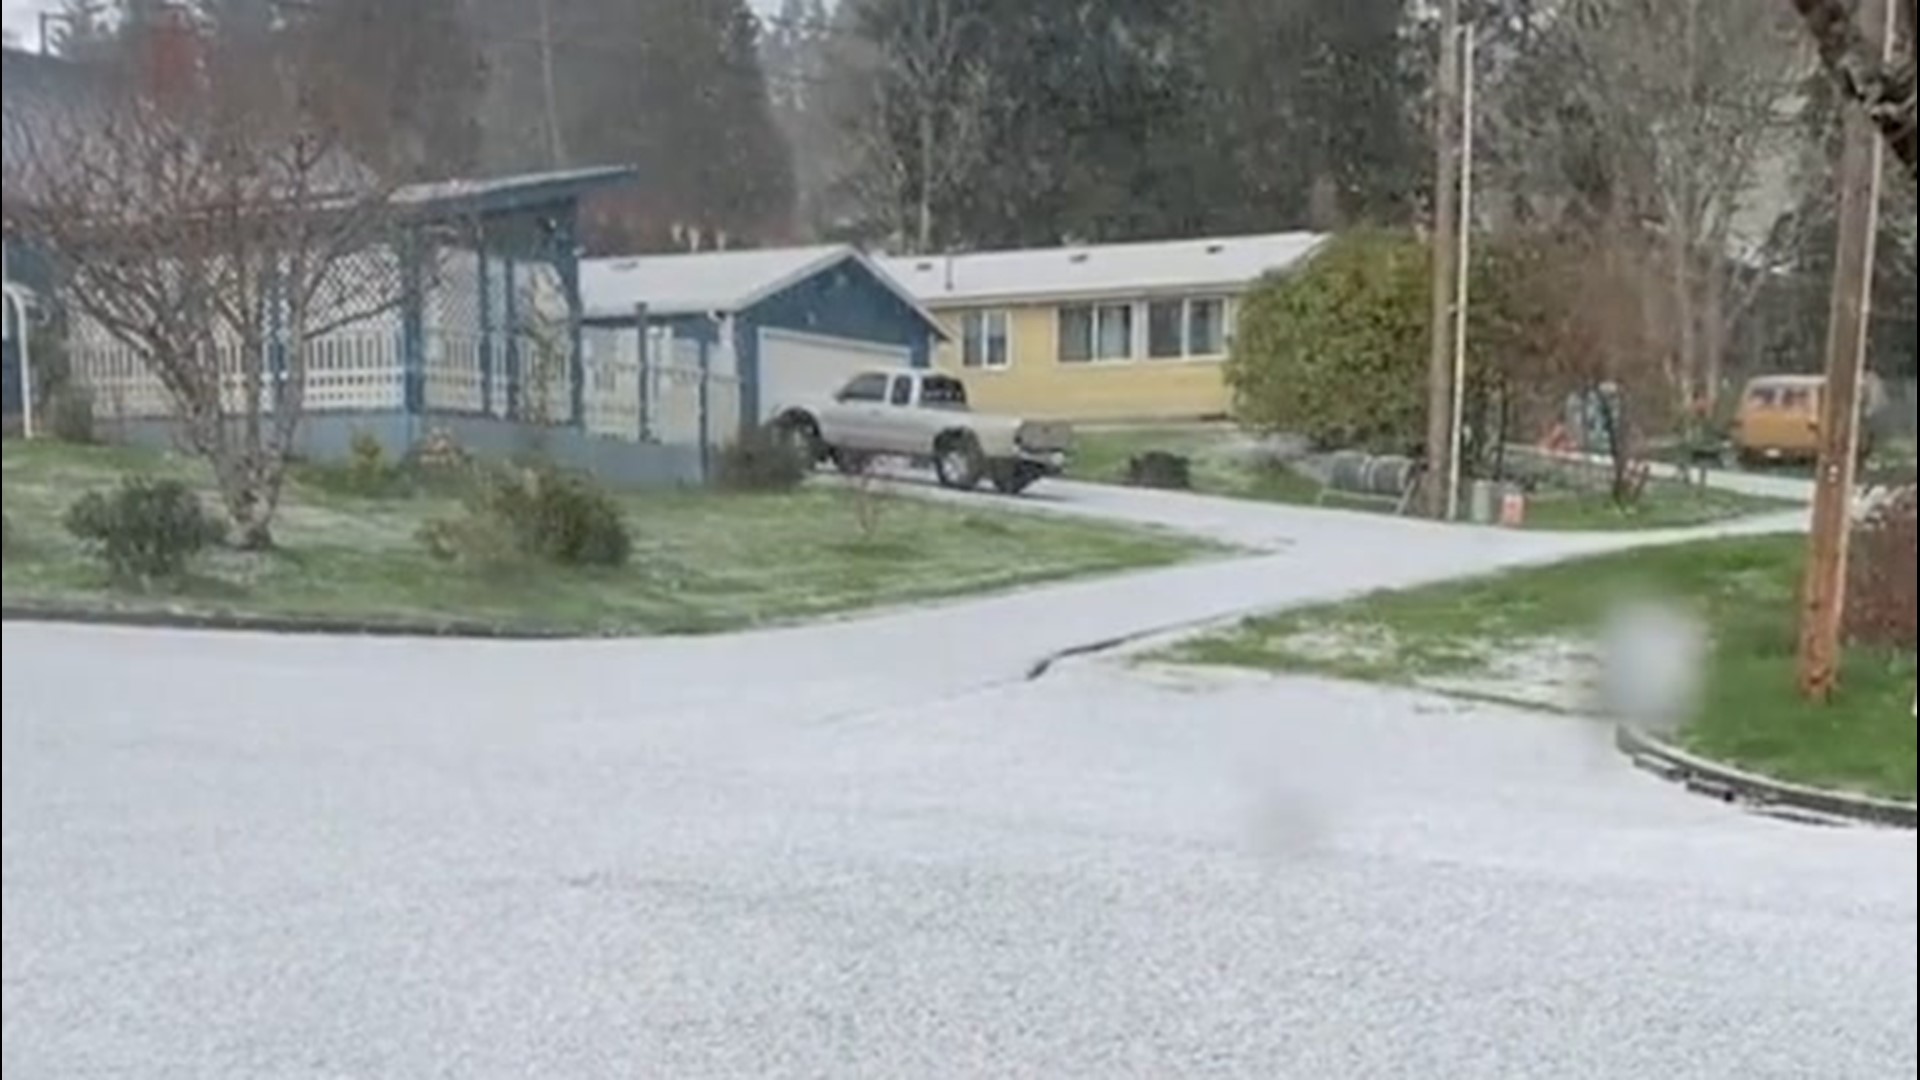 Hail pounded down early in the day on Sunday, March 7, in Astoria, Oregon